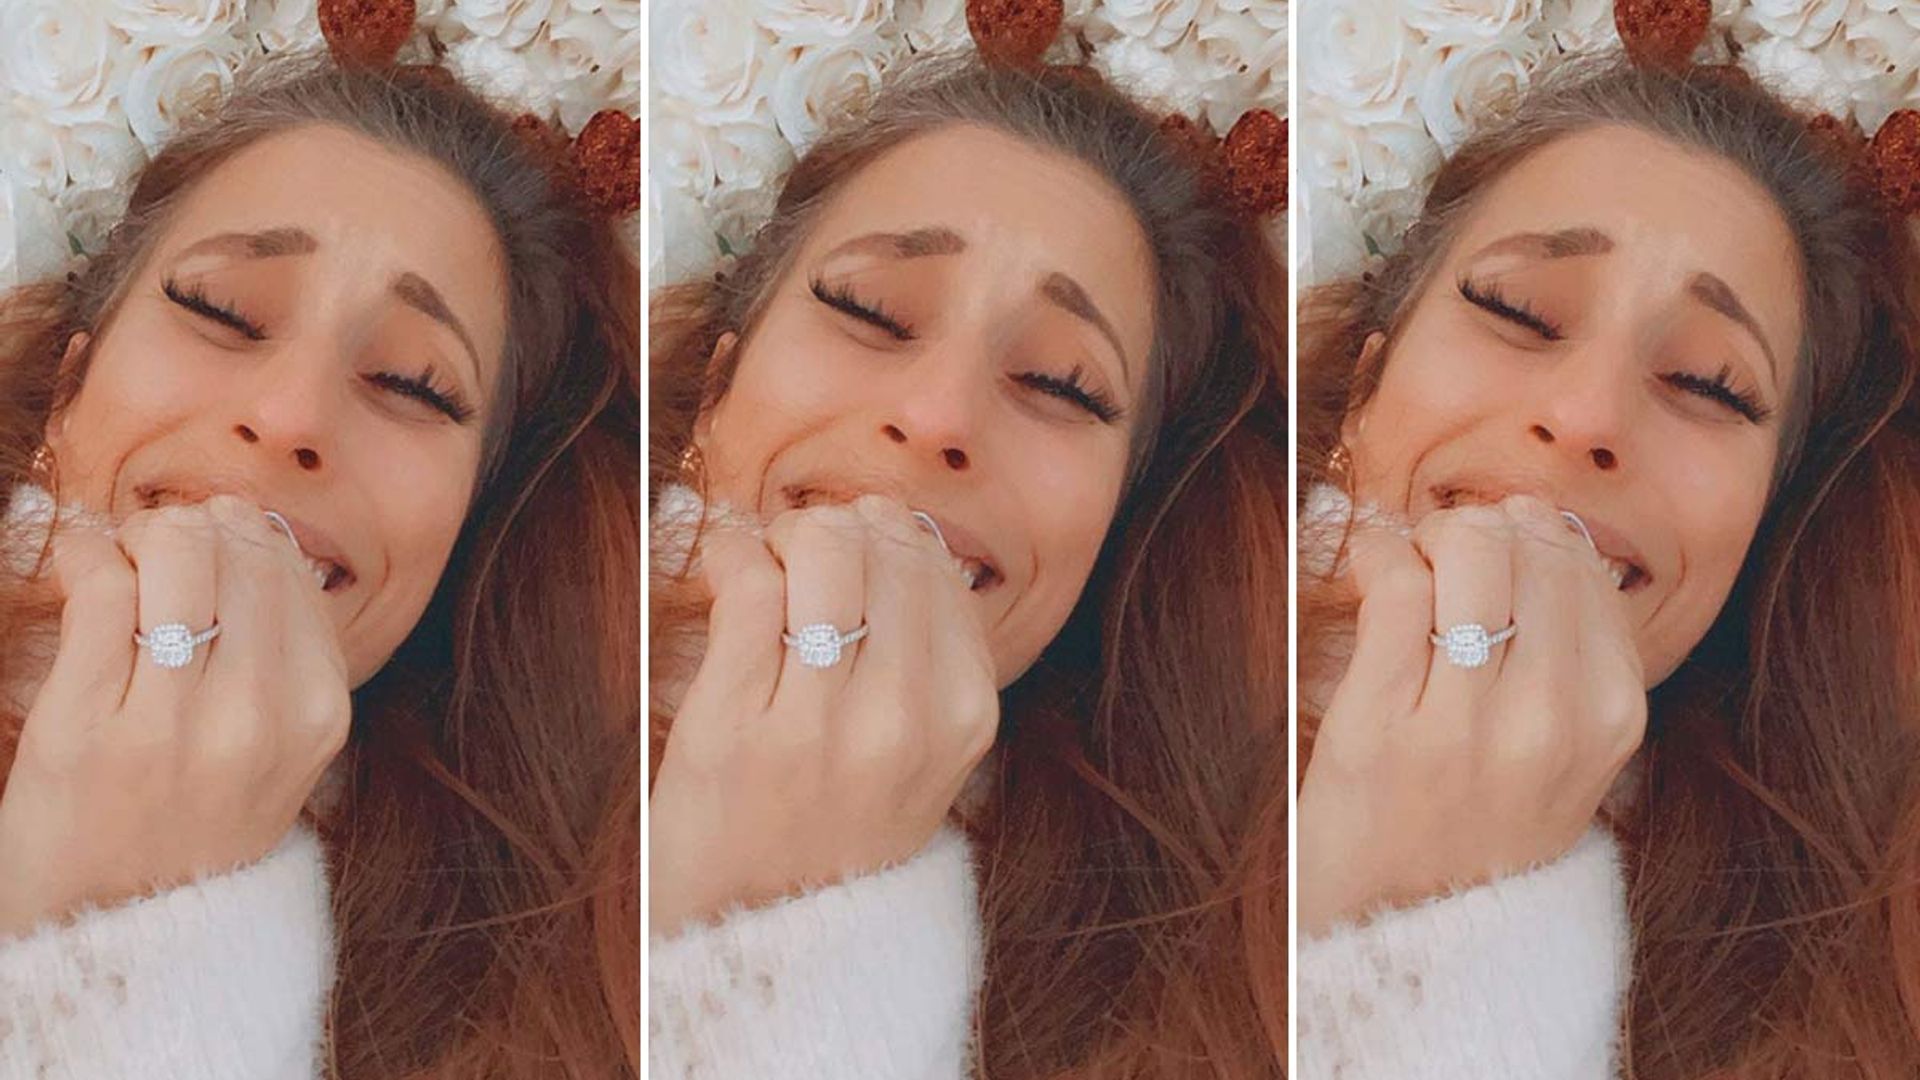 stacey solomon engagement ring